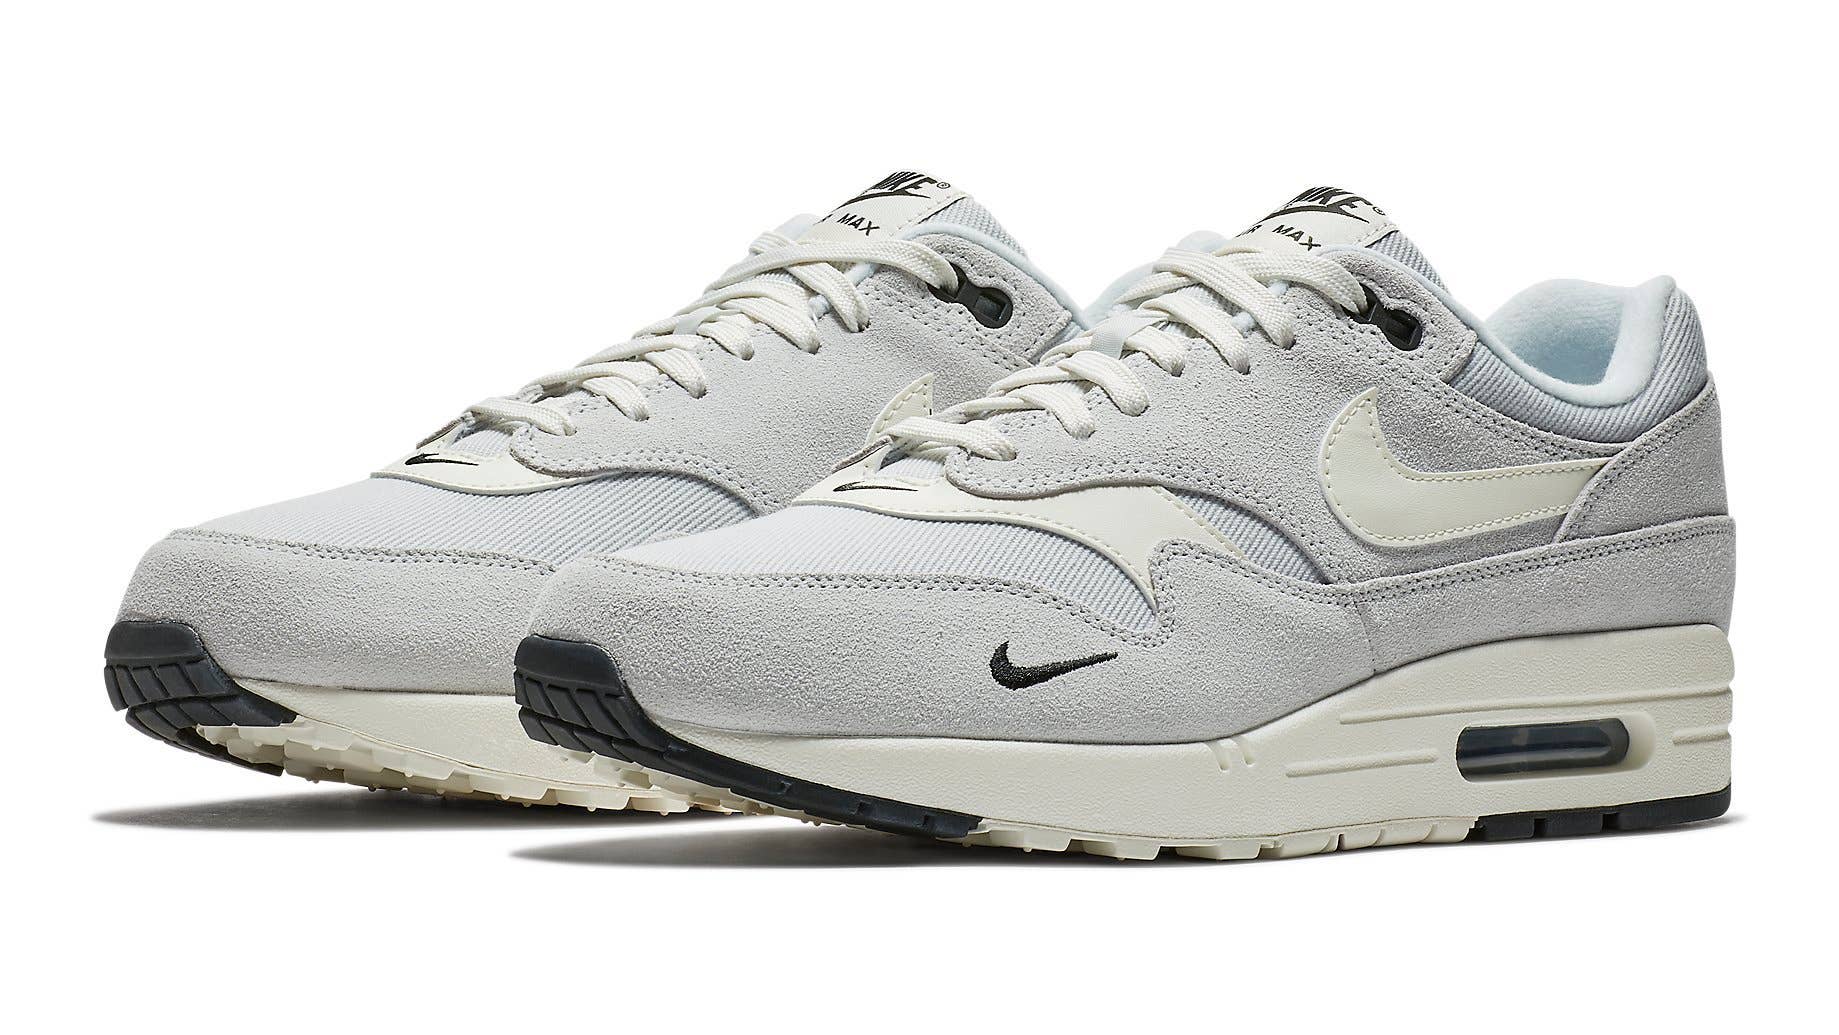 Nike Adds a Mini Swoosh to the Latest Air Max 1